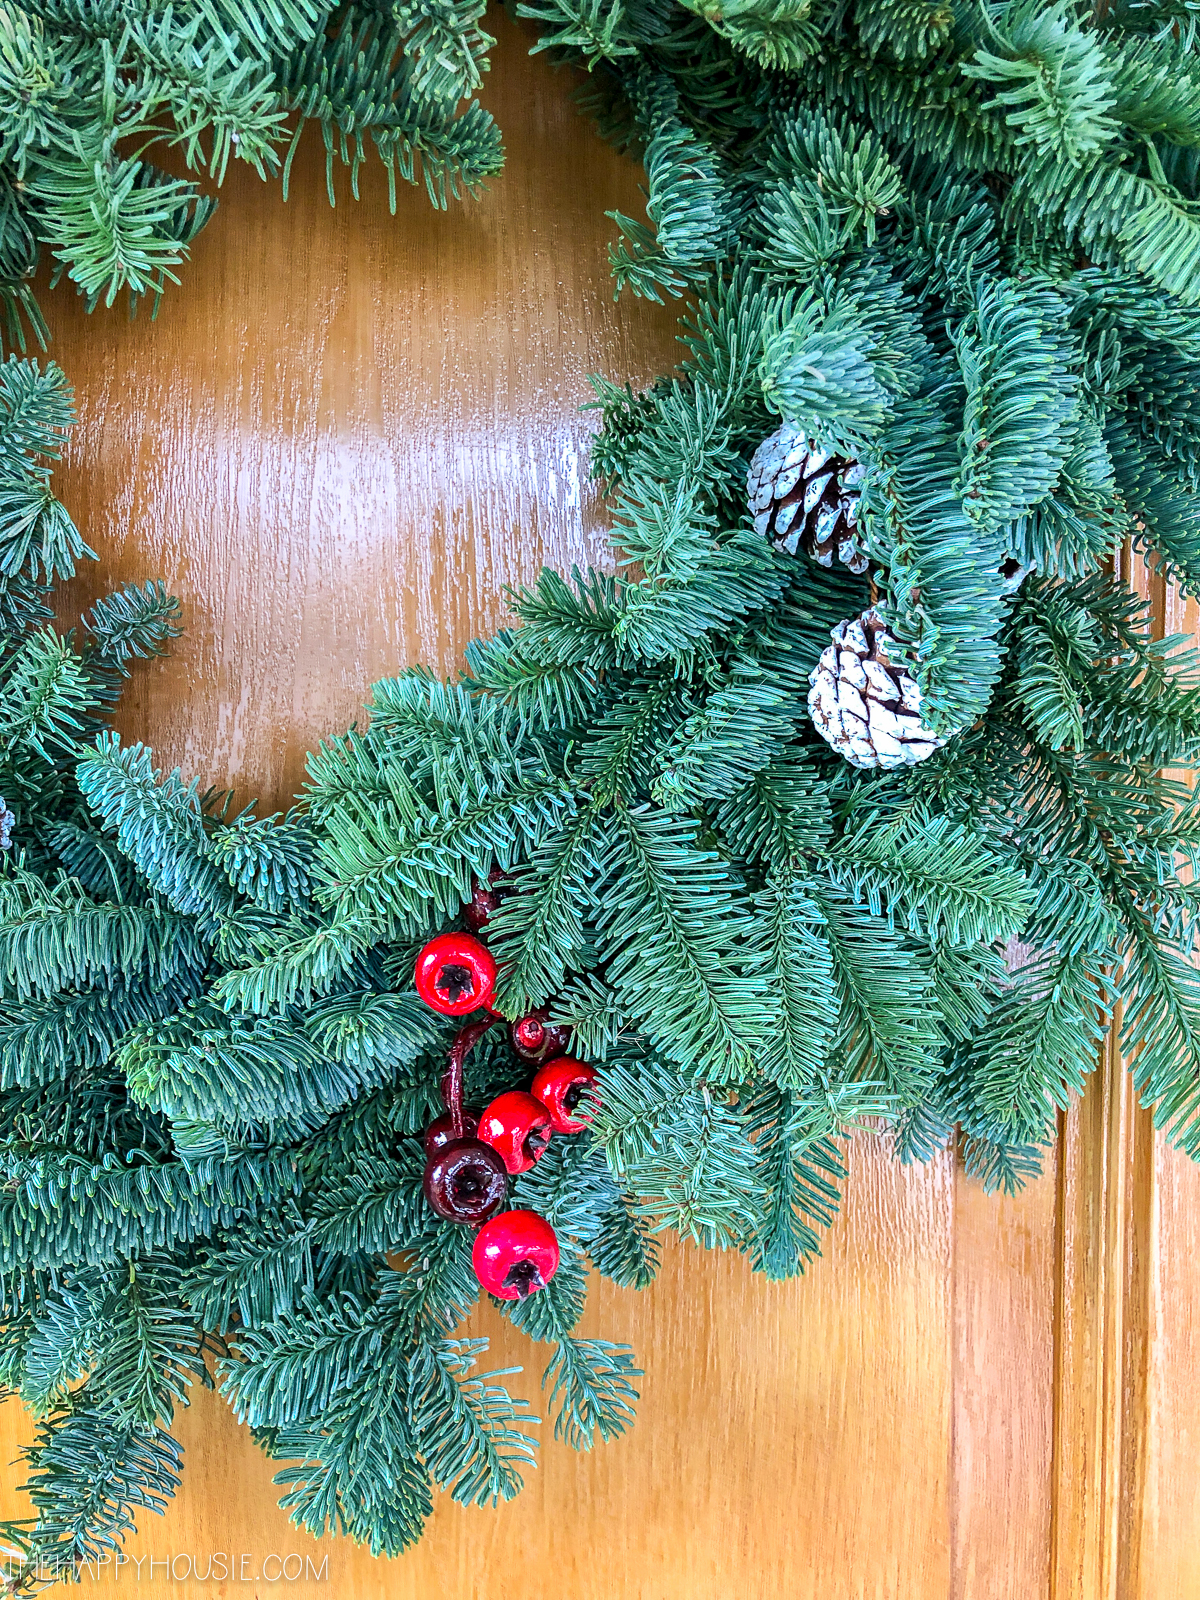 The green wreath on the door with red berries on it.